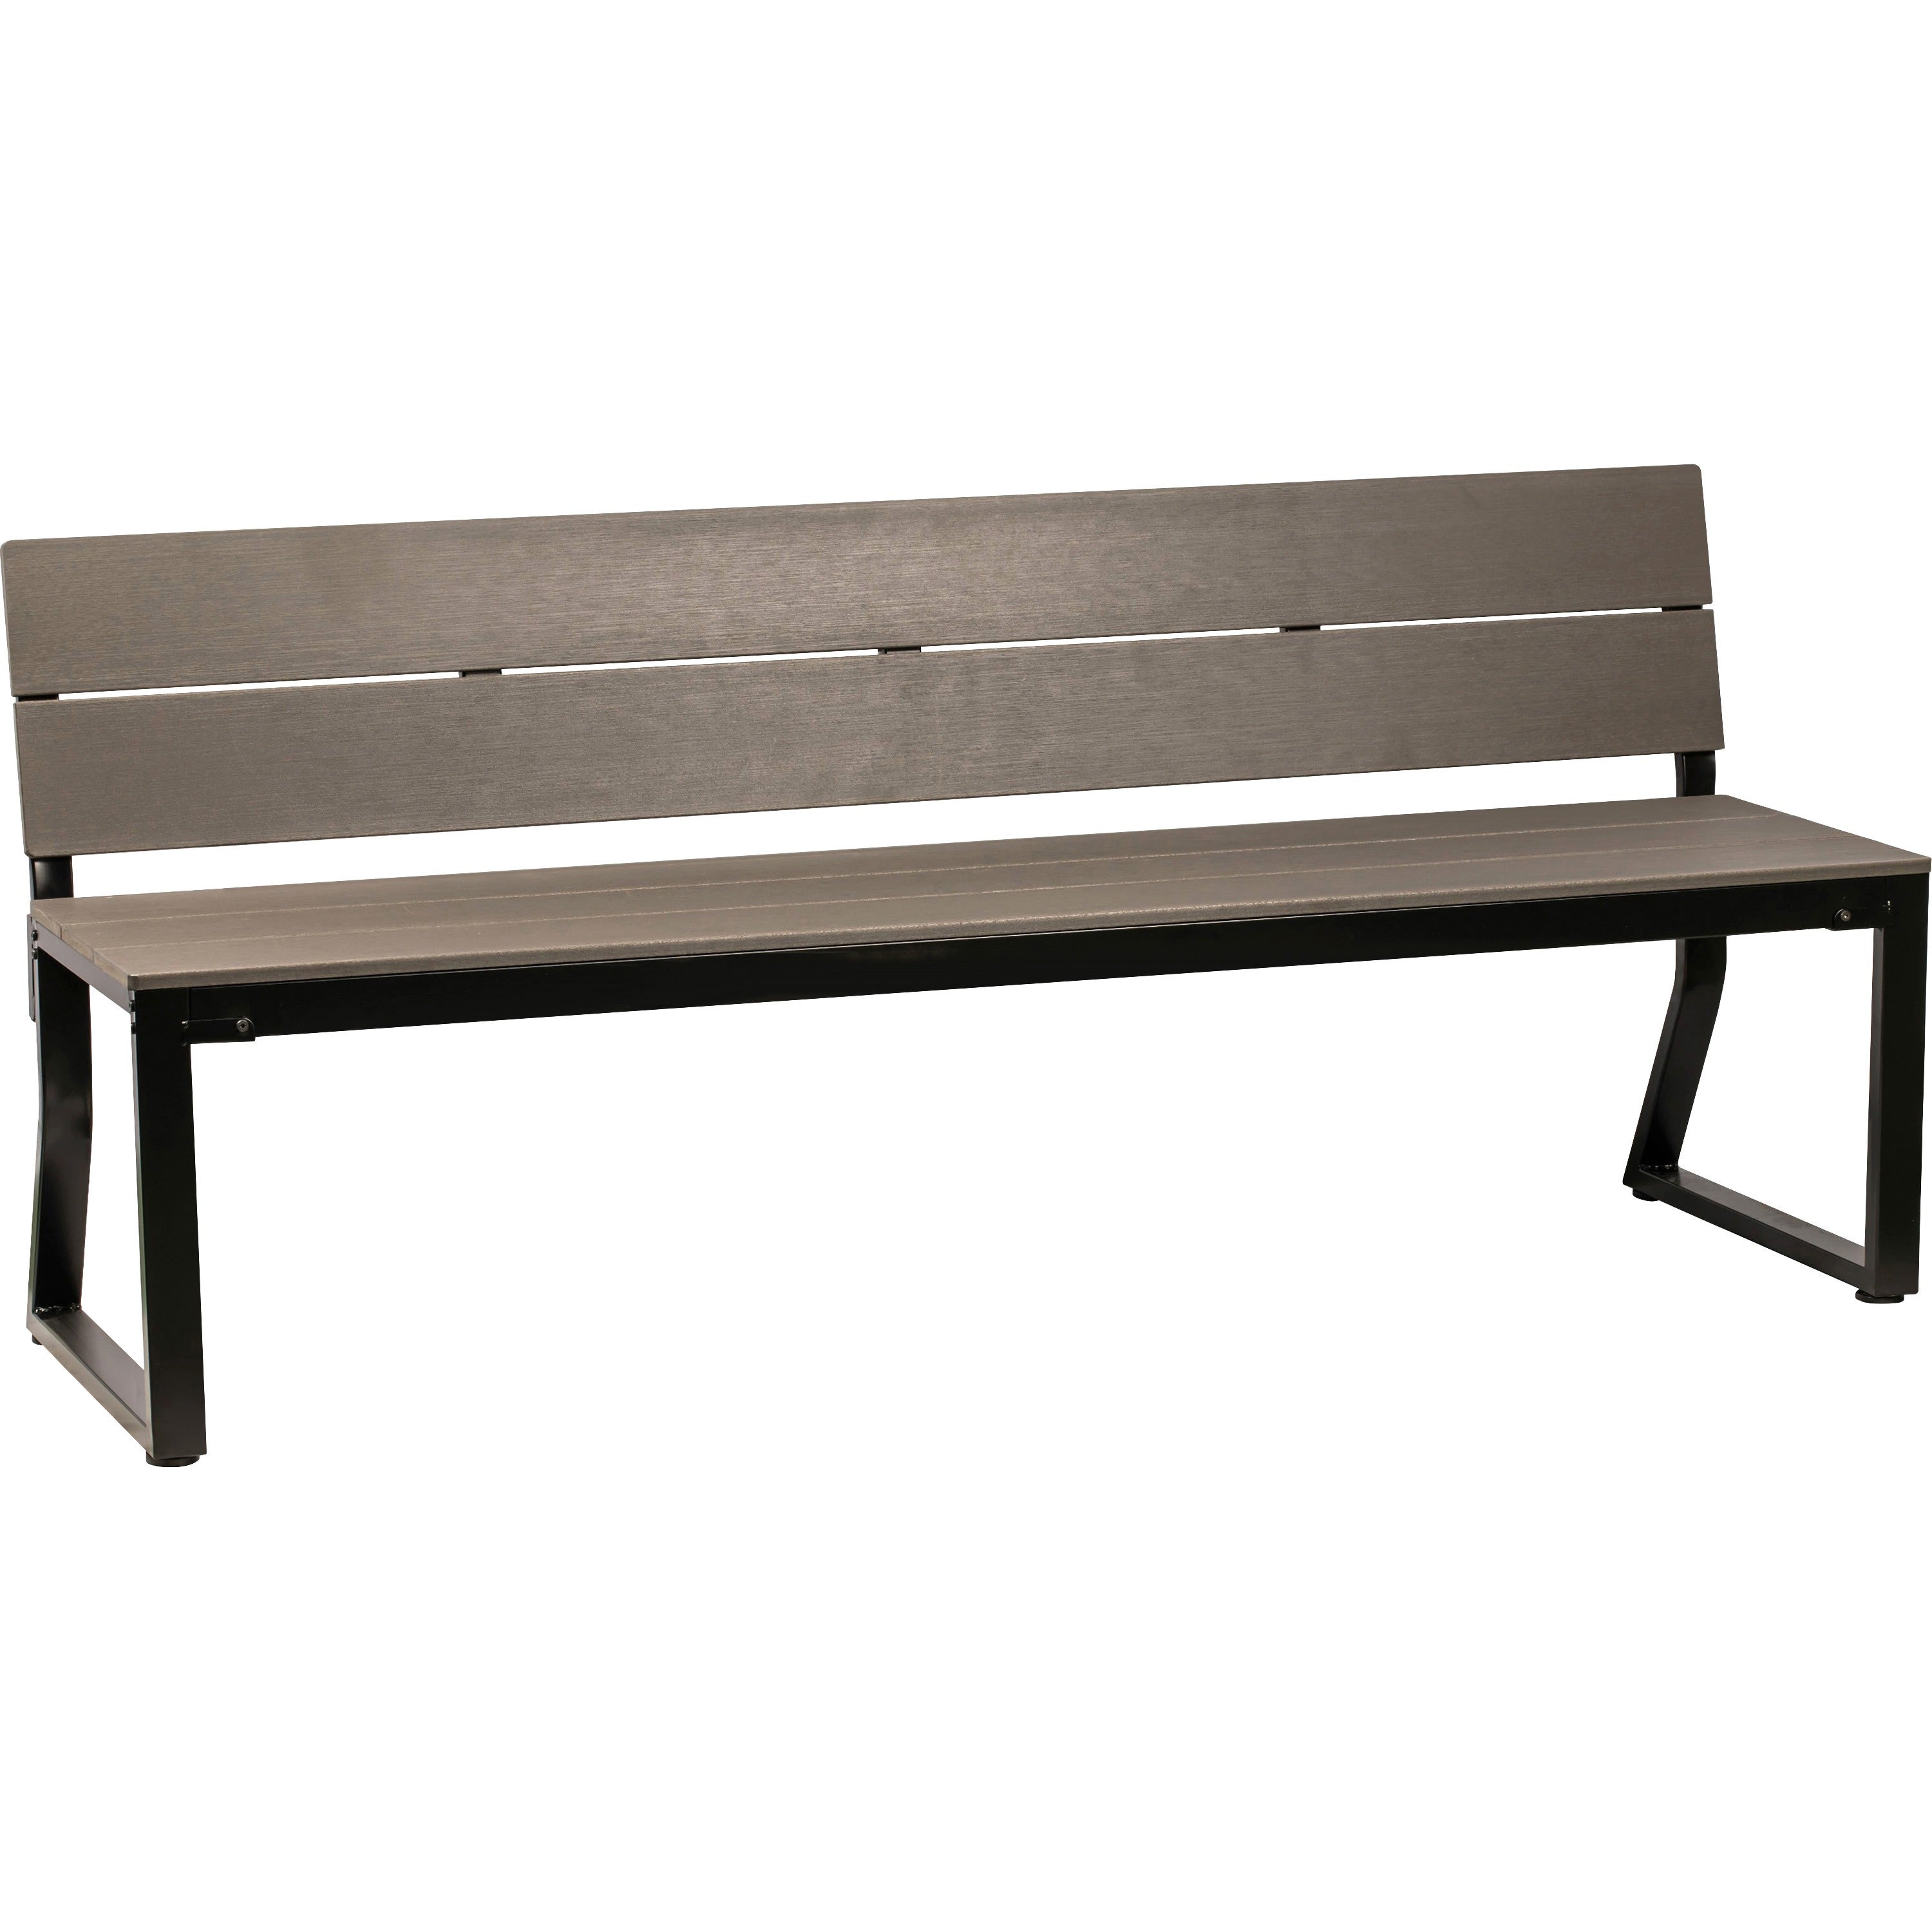 lorell-faux-wood-outdoor-bench-with-backrest-charcoal-faux-wood-polystyrene-seat-charcoal-faux-wood-polystyrene-back-1-each_llr42691 - 1